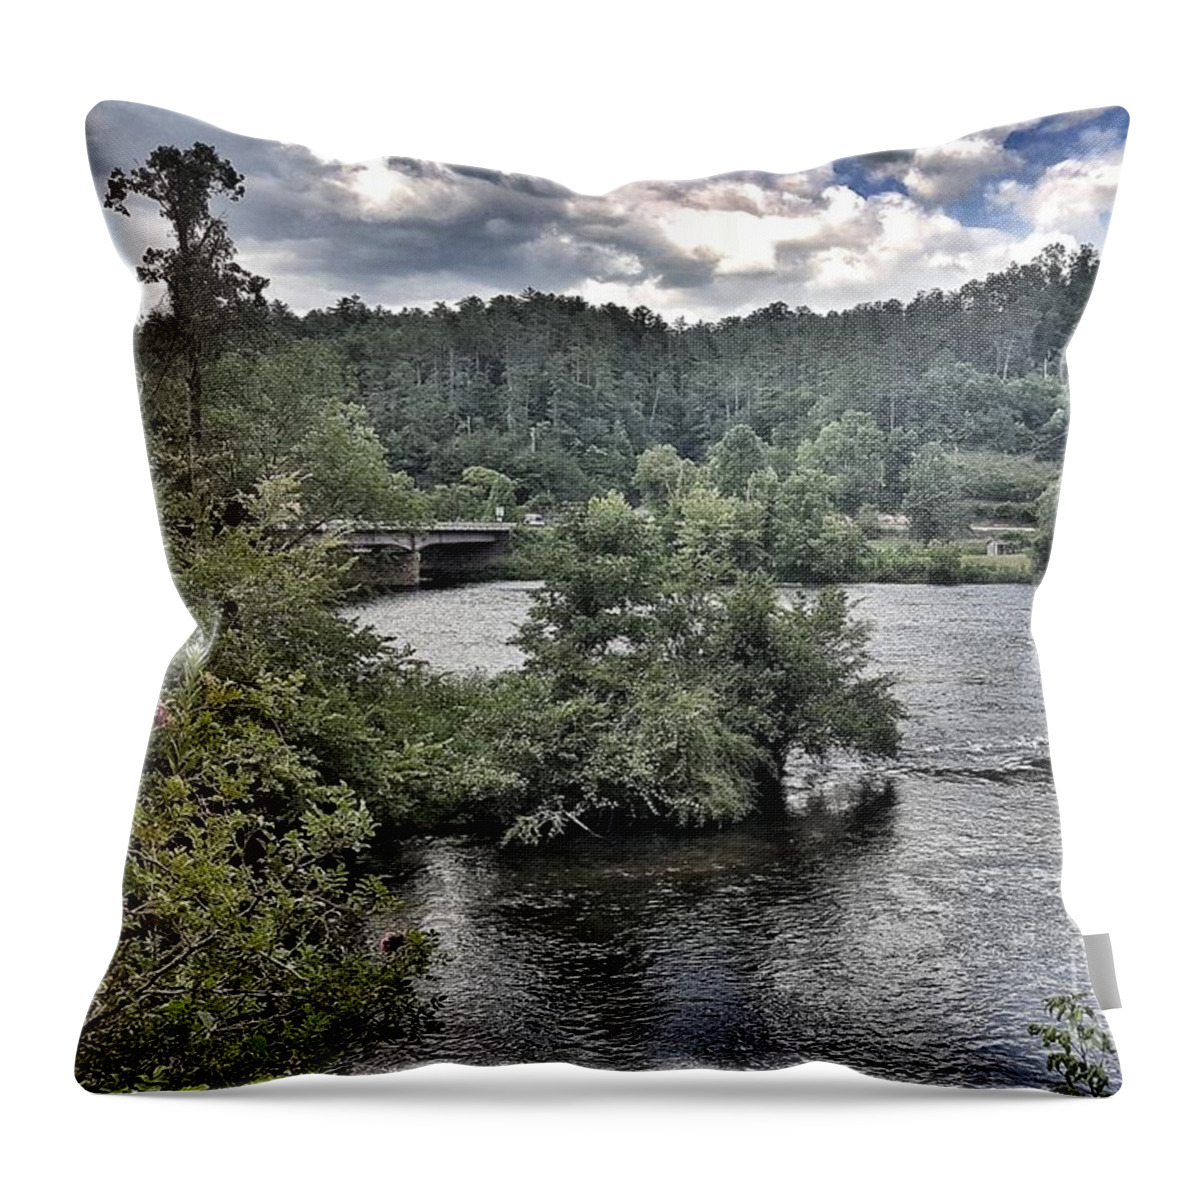 Hiwassee Throw Pillow featuring the photograph River Wonders by Rachel Hannah